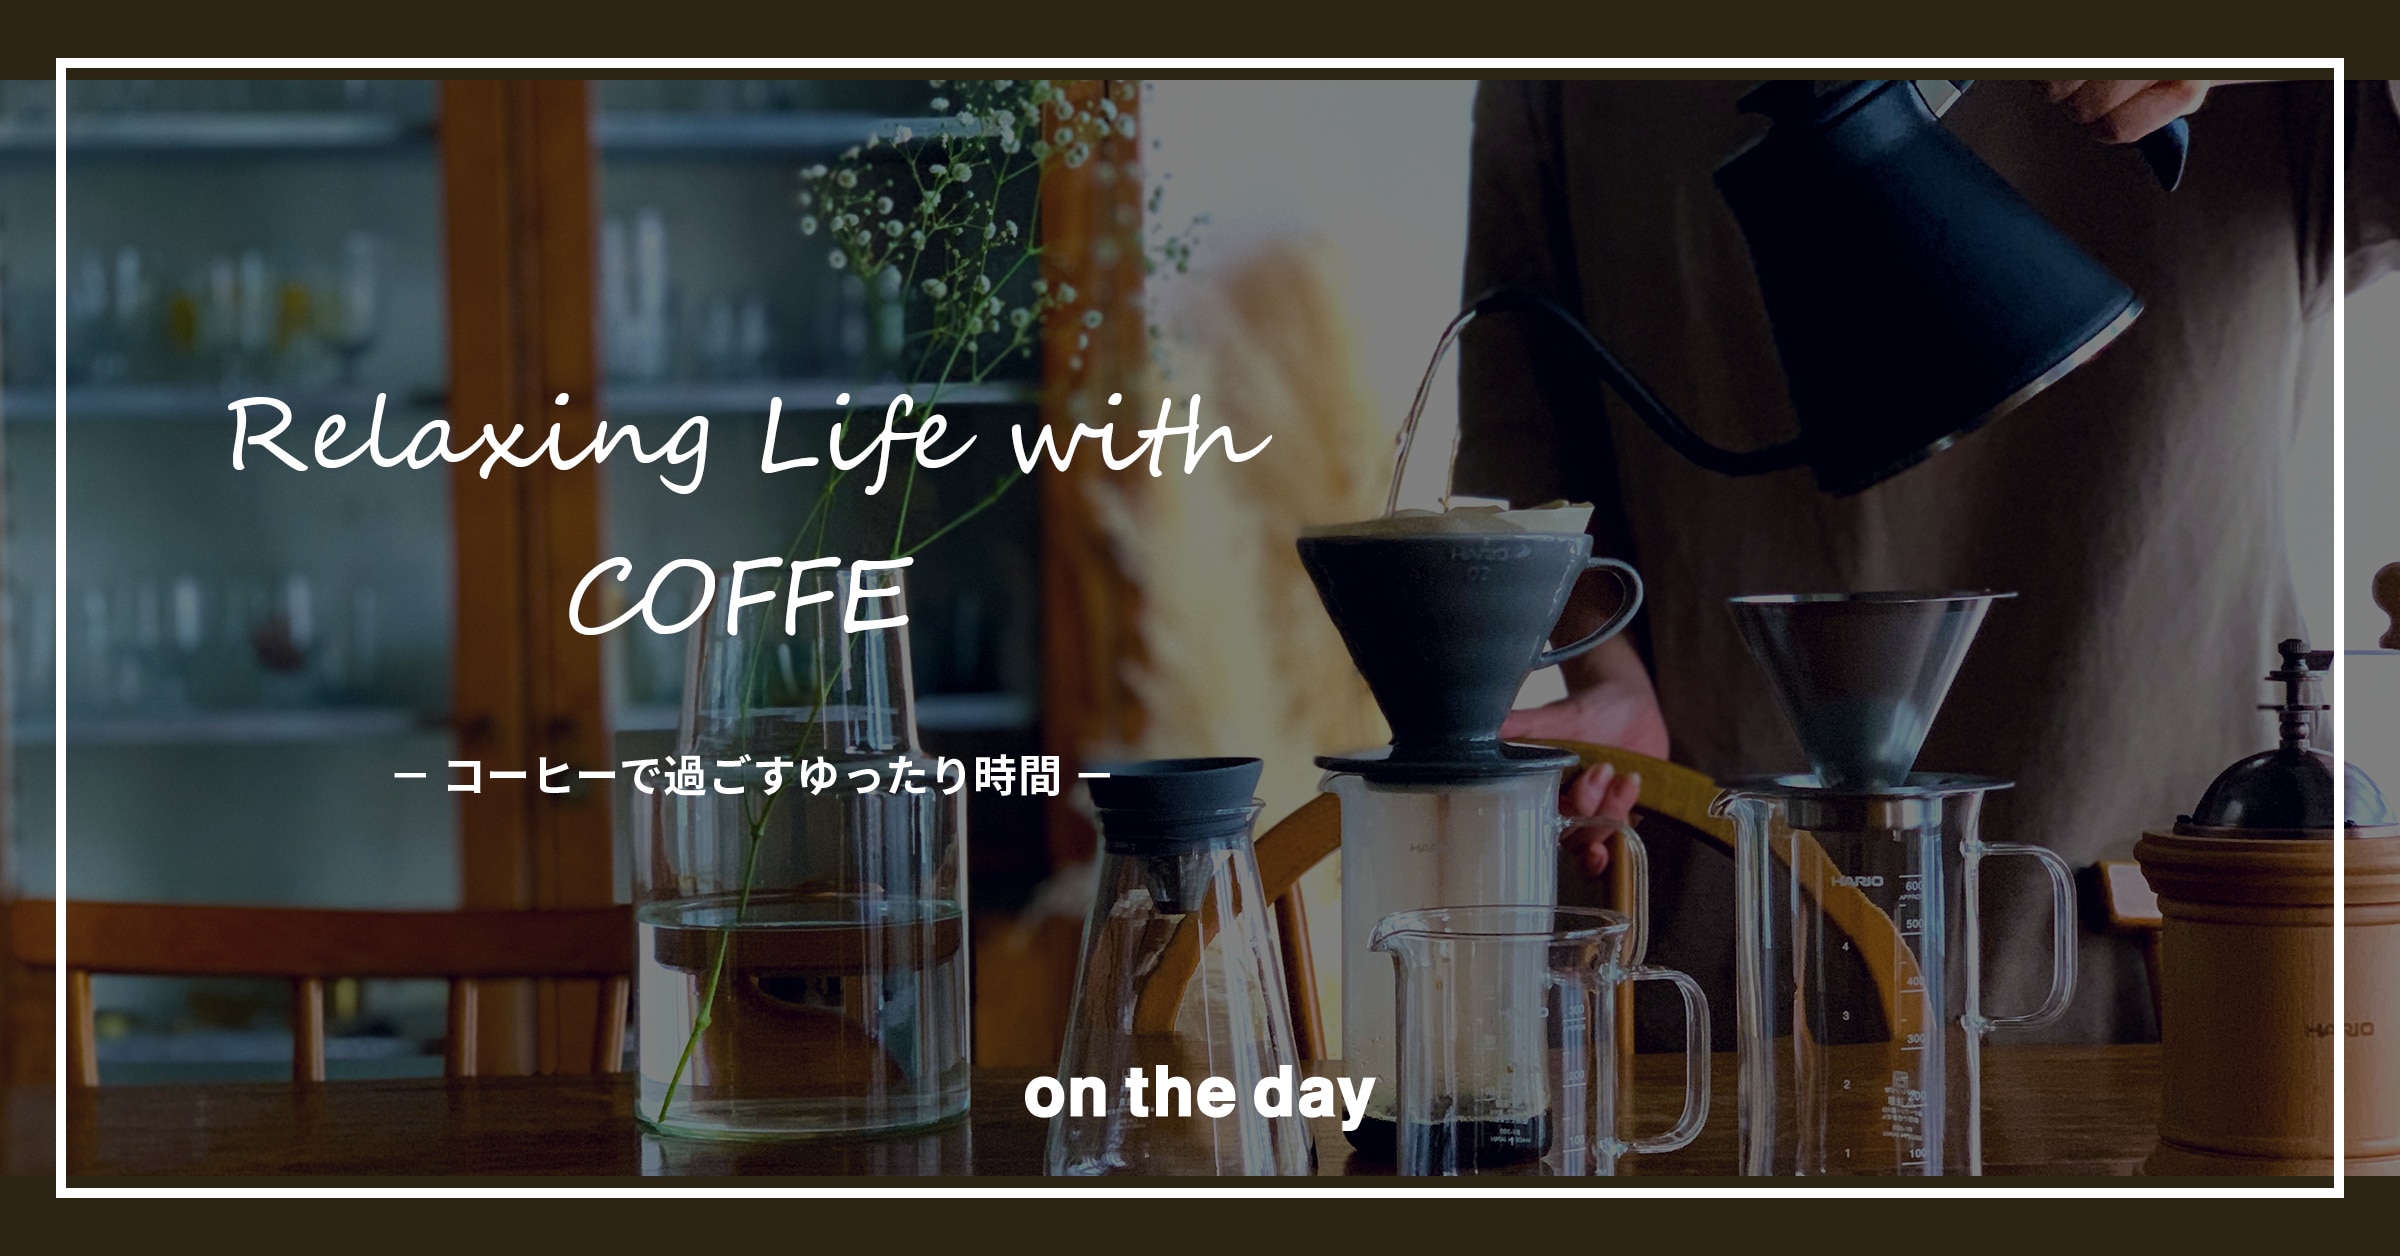 Reraxing Life with Coffee